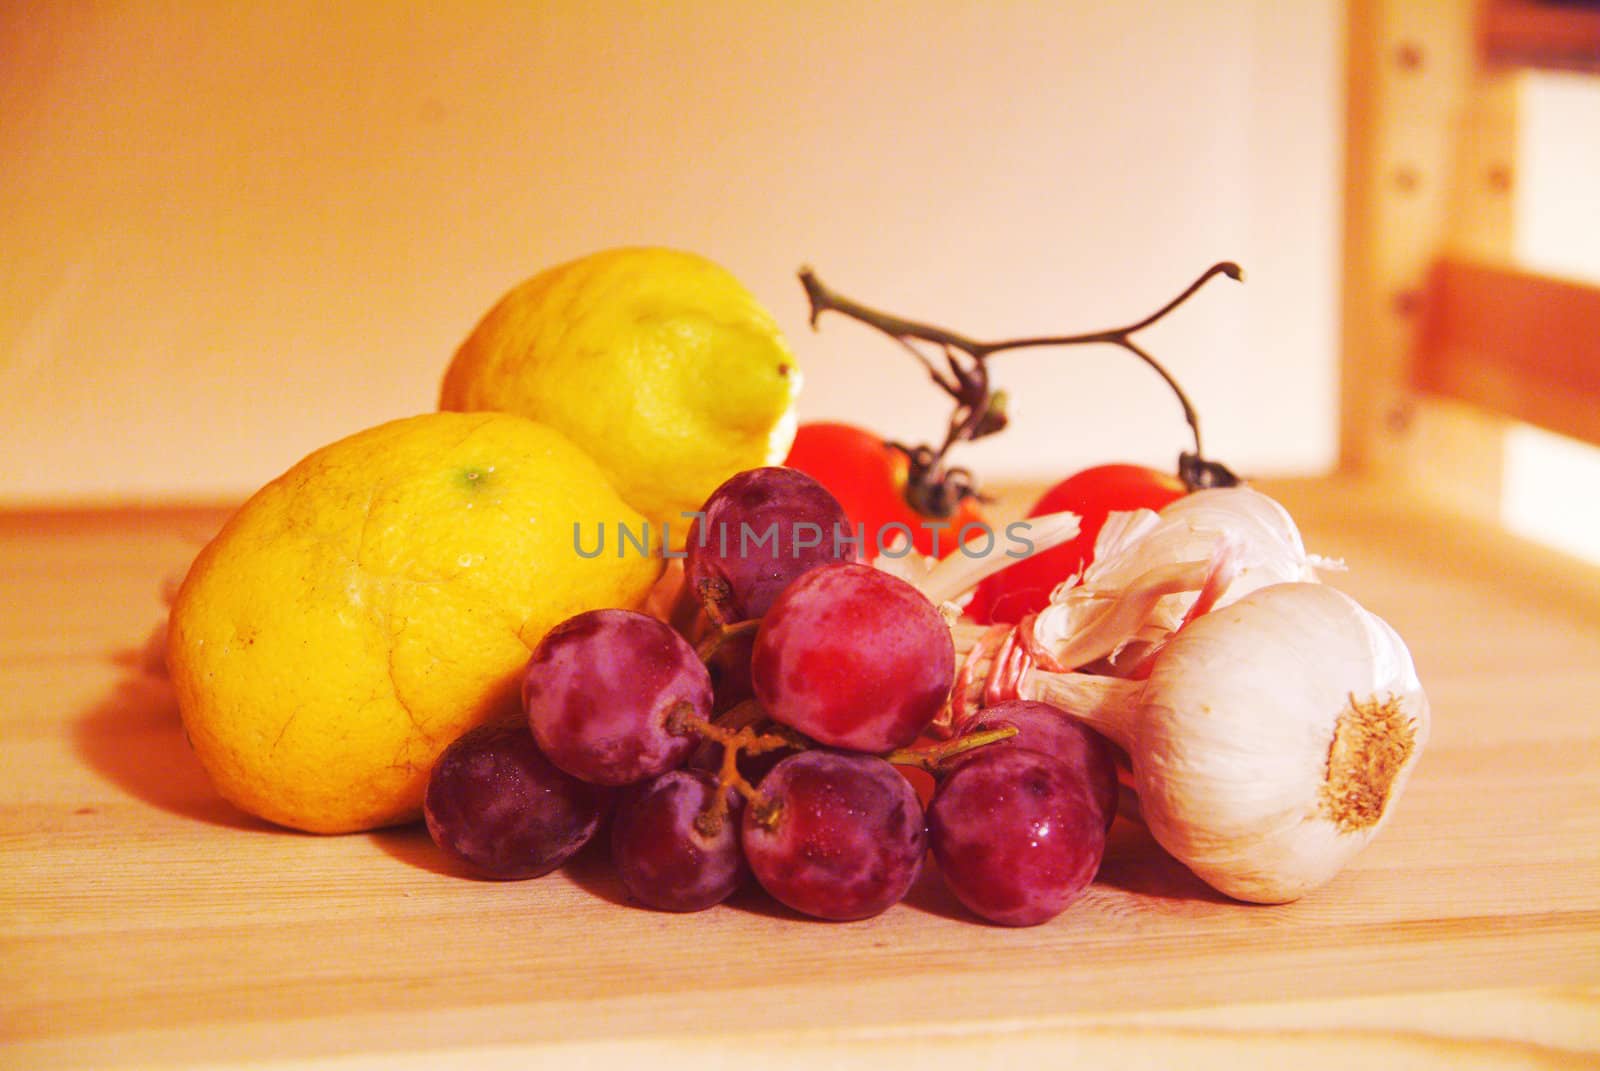 Grapes onion and lemons... by silvie19